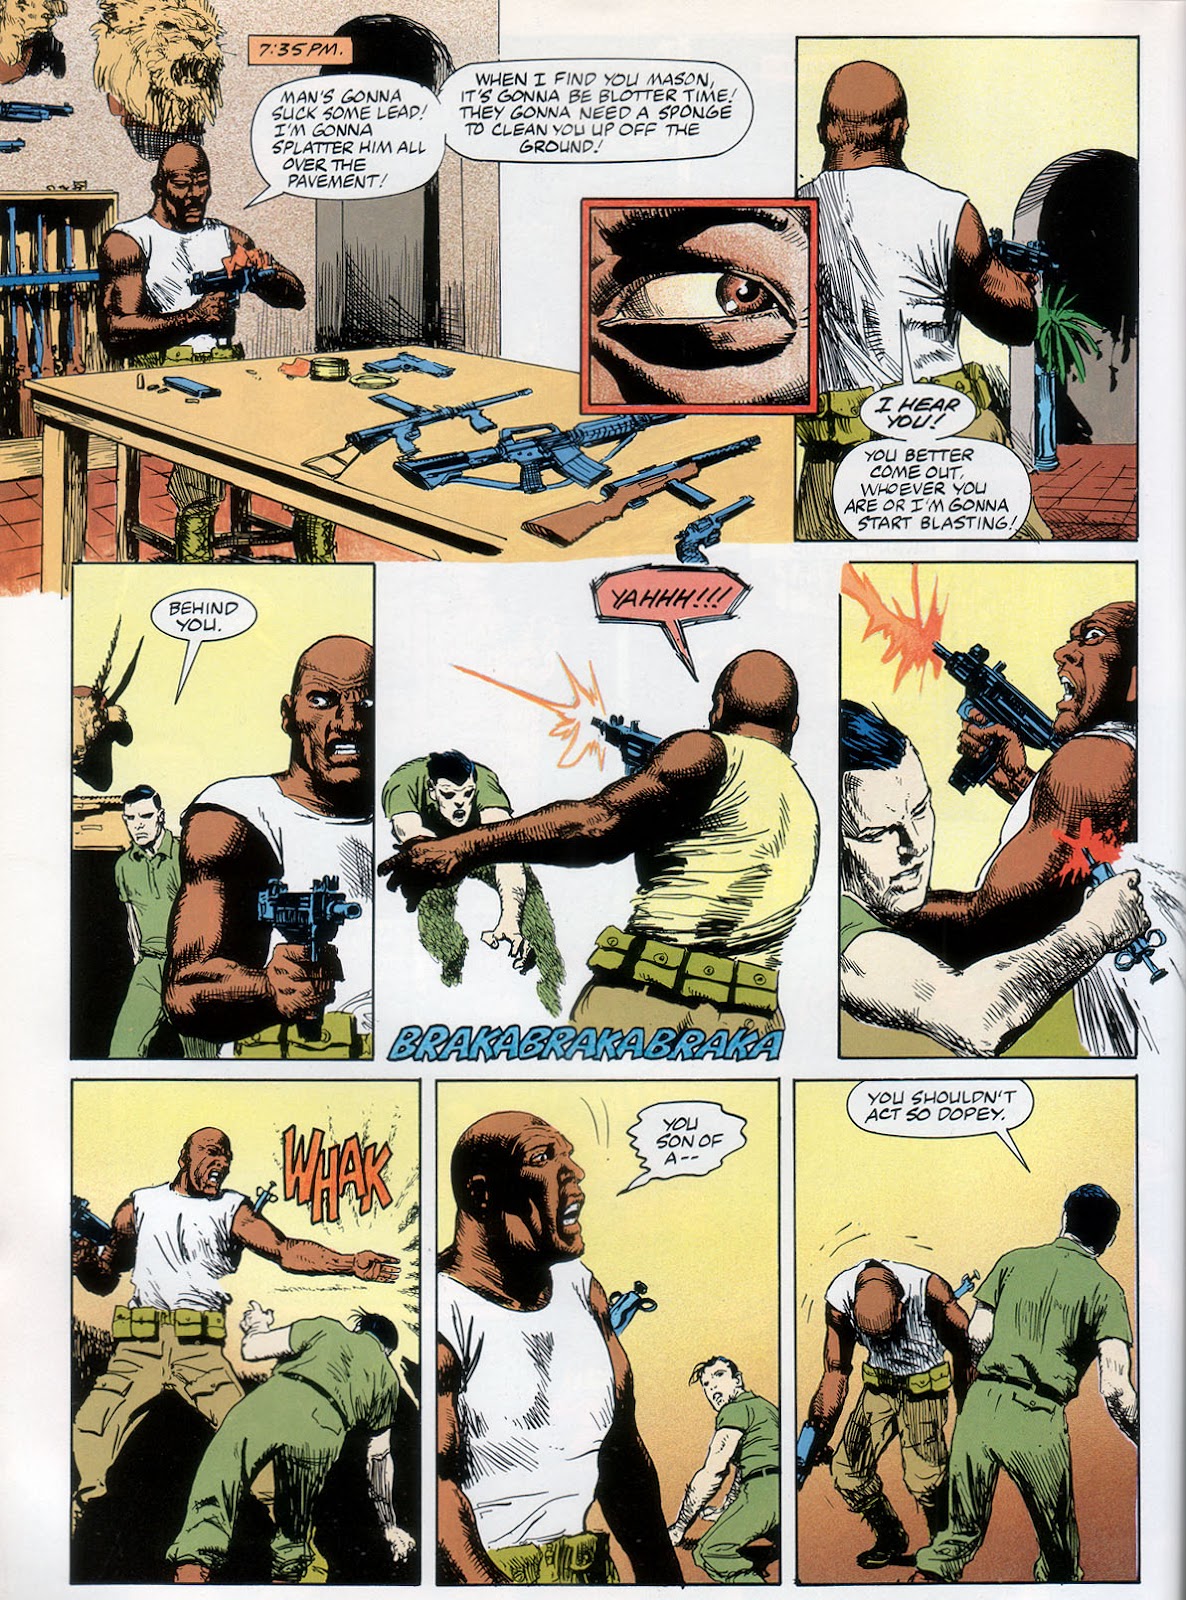 Marvel Graphic Novel issue 57 - Rick Mason - The Agent - Page 70